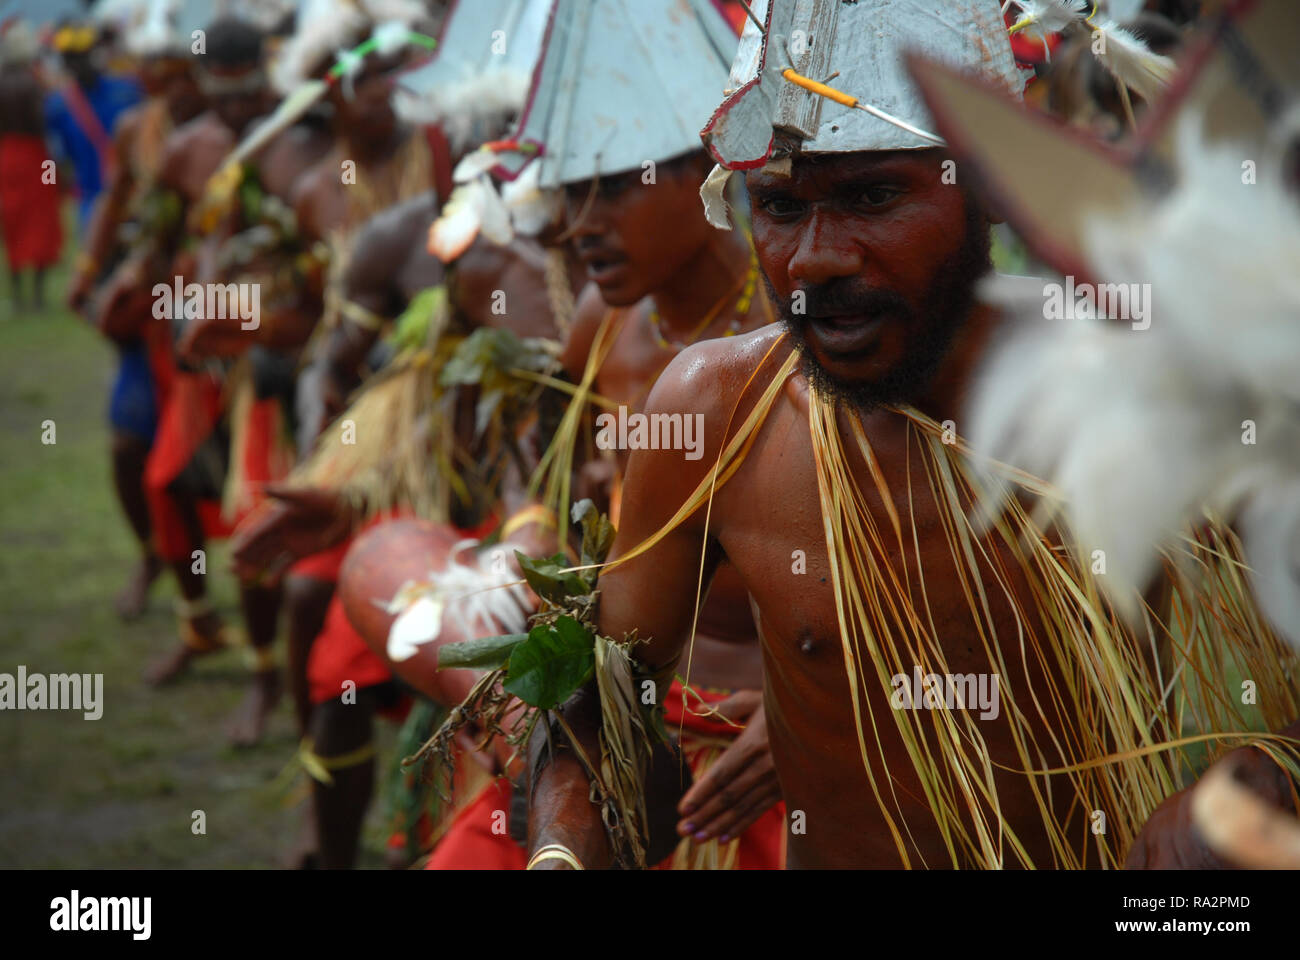 Colourfully dressed and face painted men wearing boat hats dancing as part of a Sing Sing in Madang, Papua New Guinea. Stock Photo